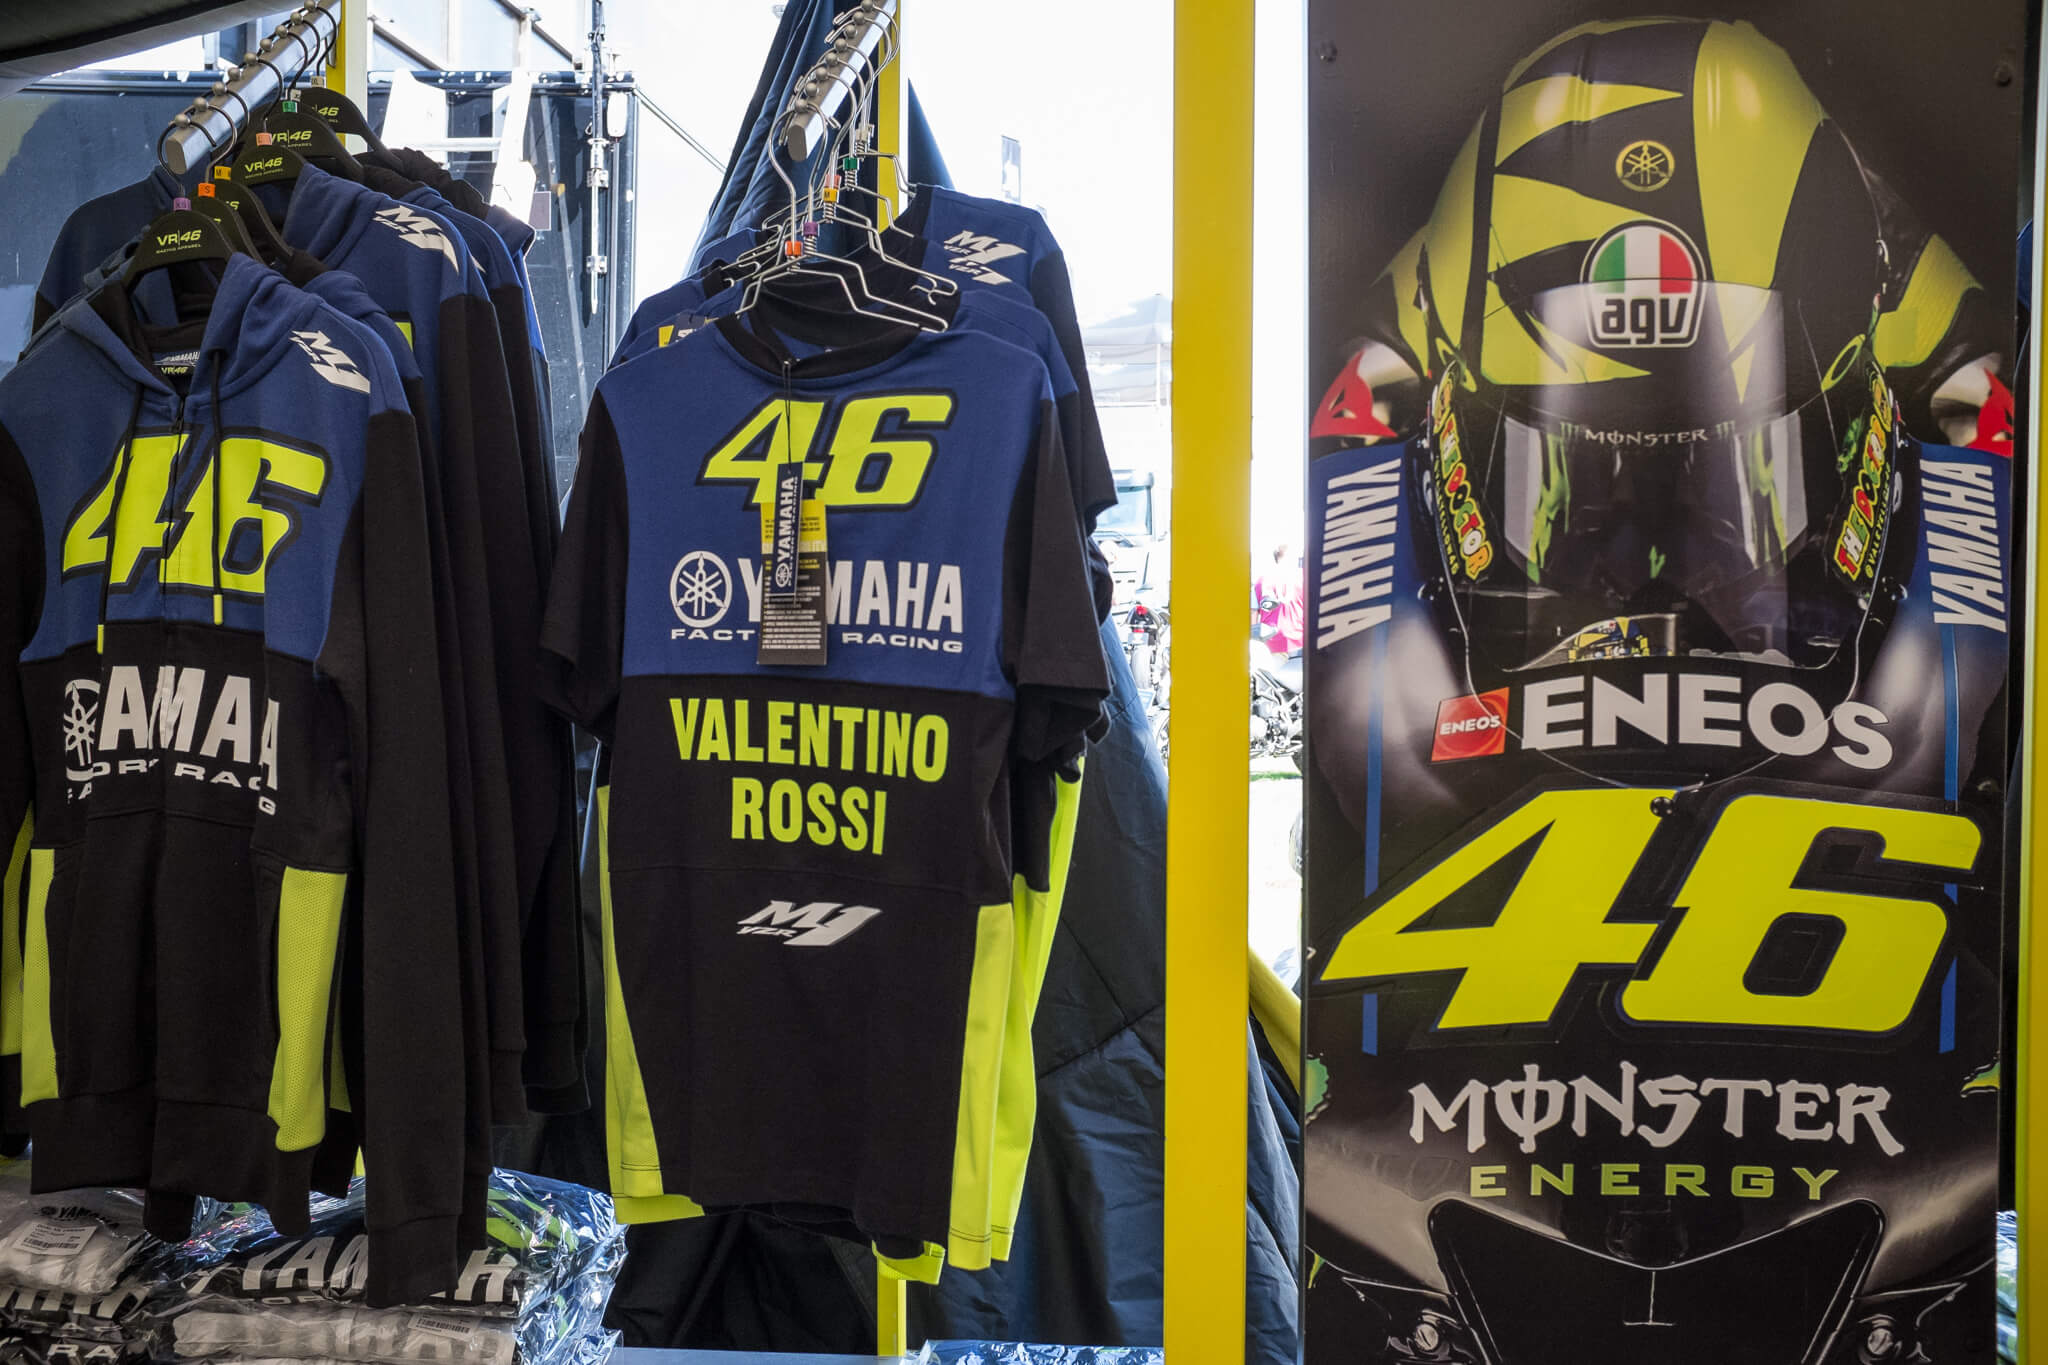 The most popular merchandise: nr. 46 Valentino Rossi